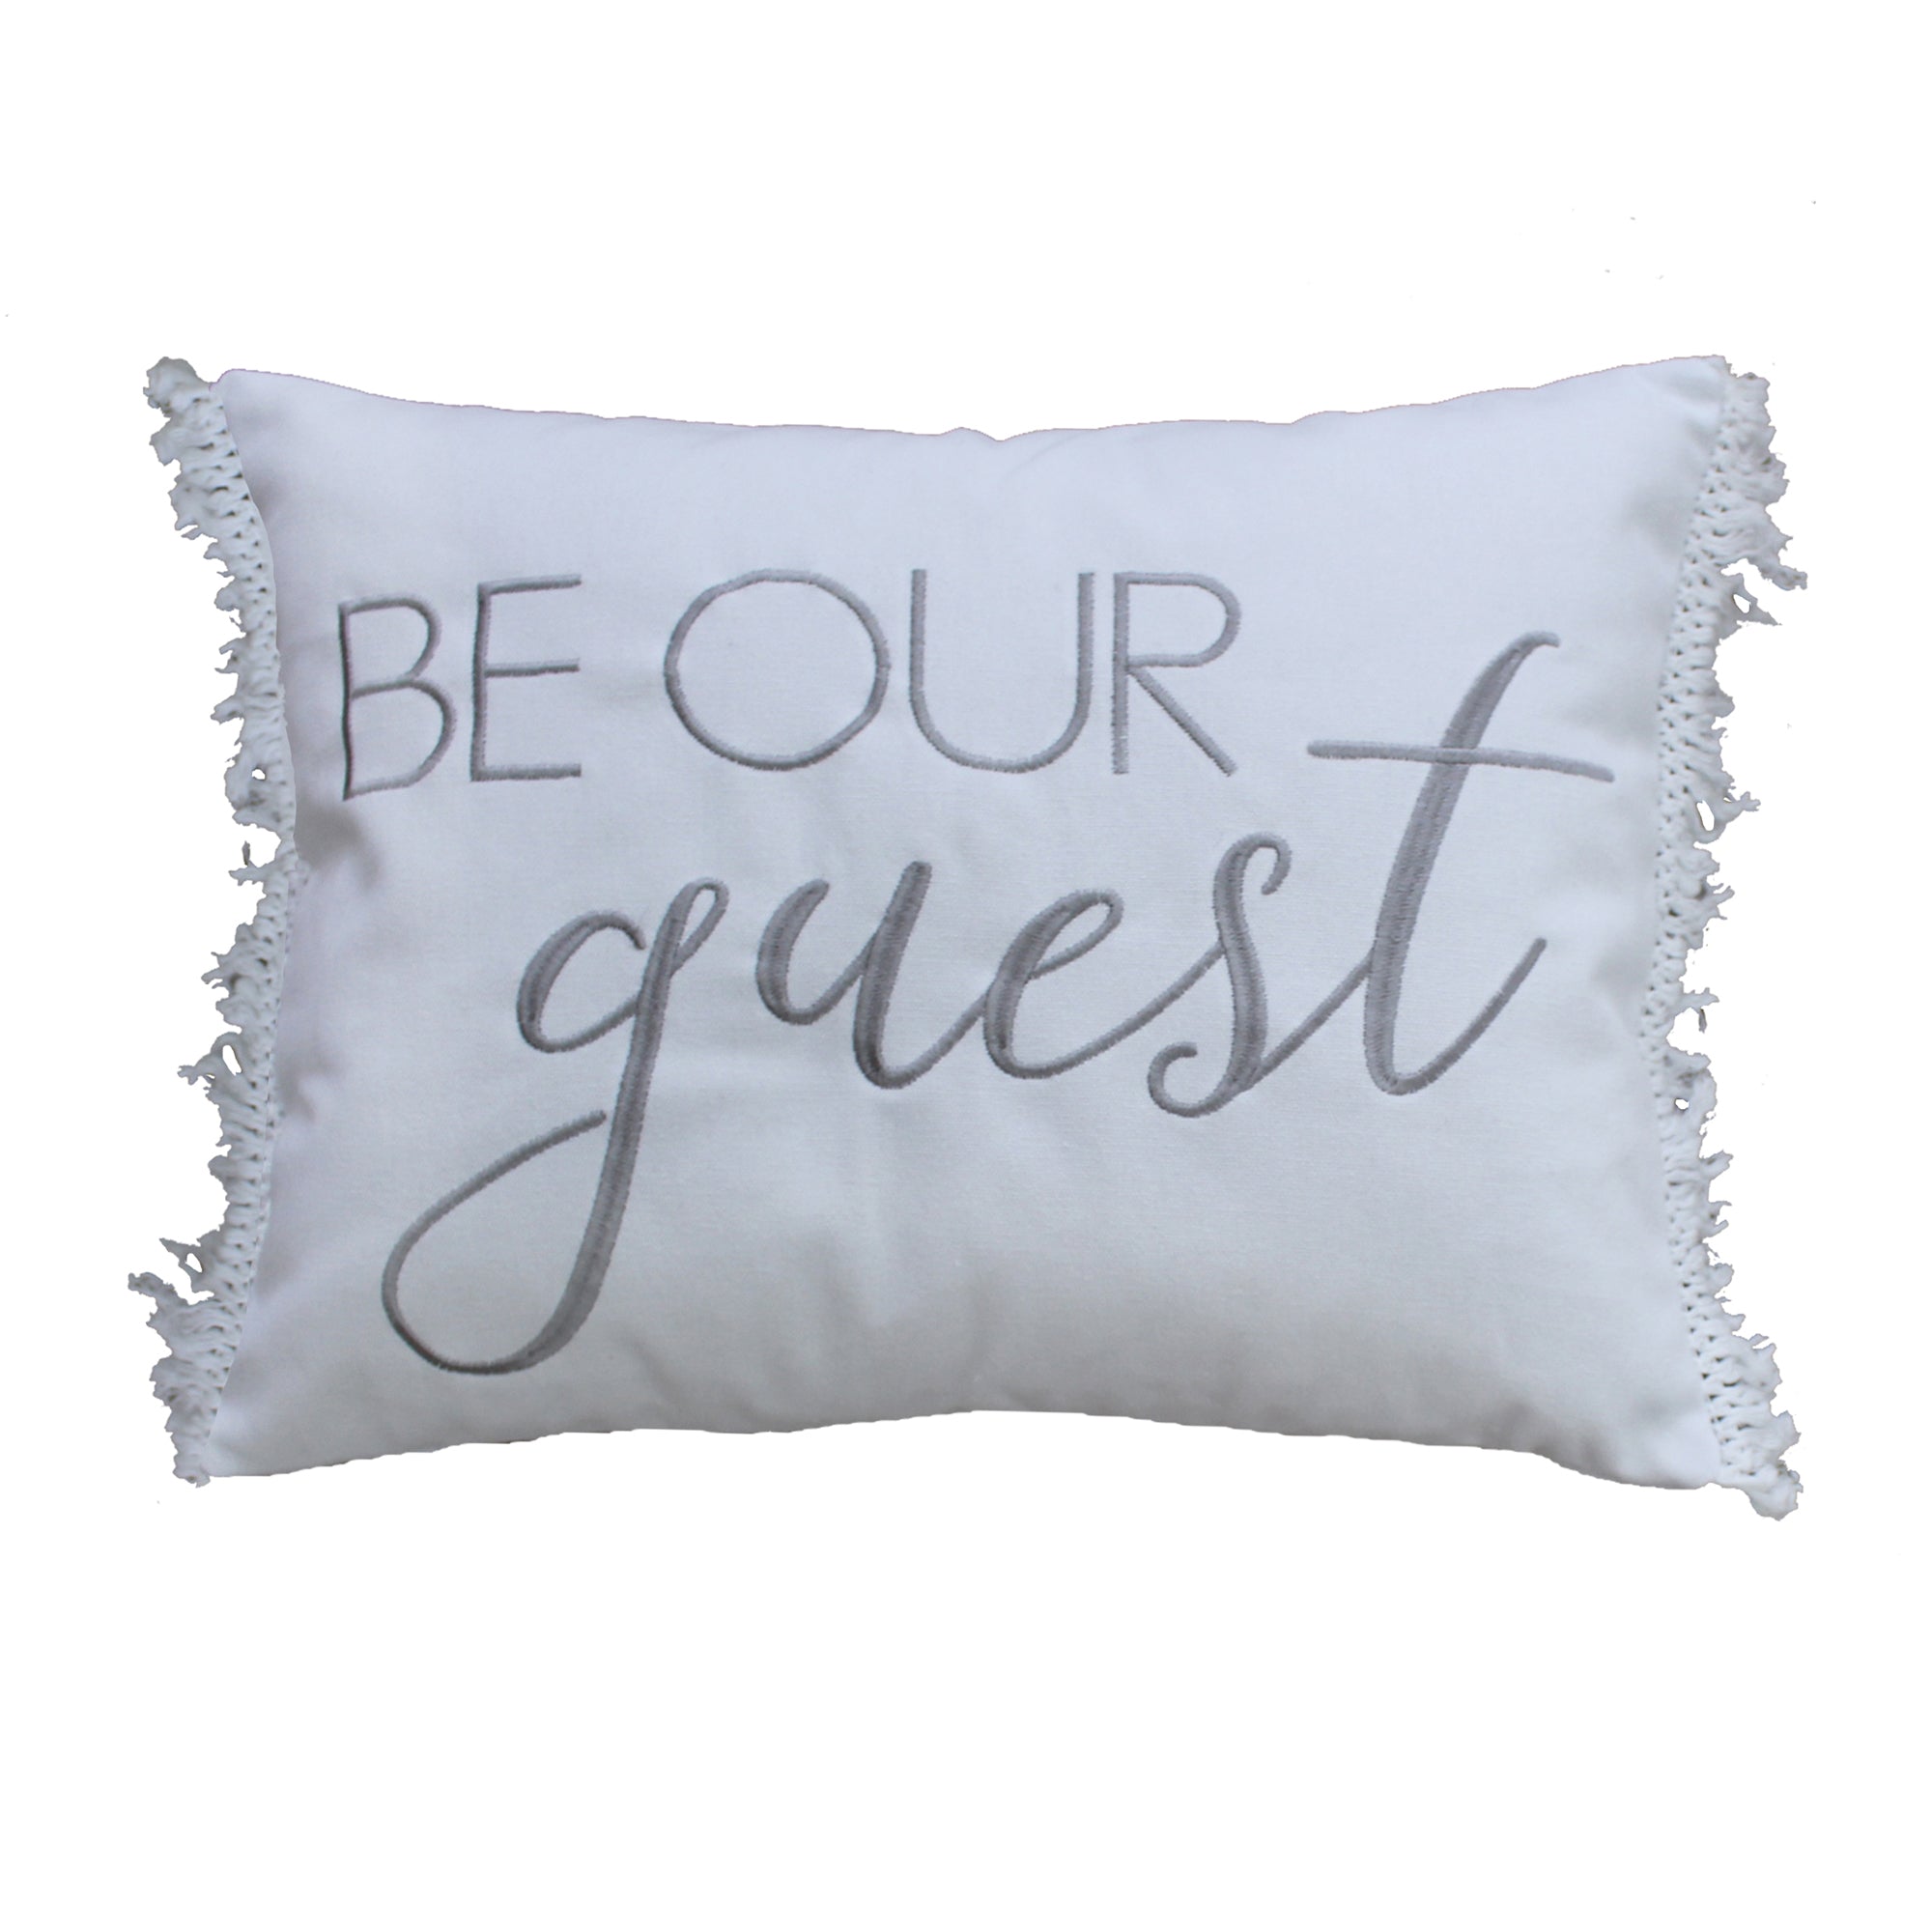 Mclain Be Our Guest Pillow